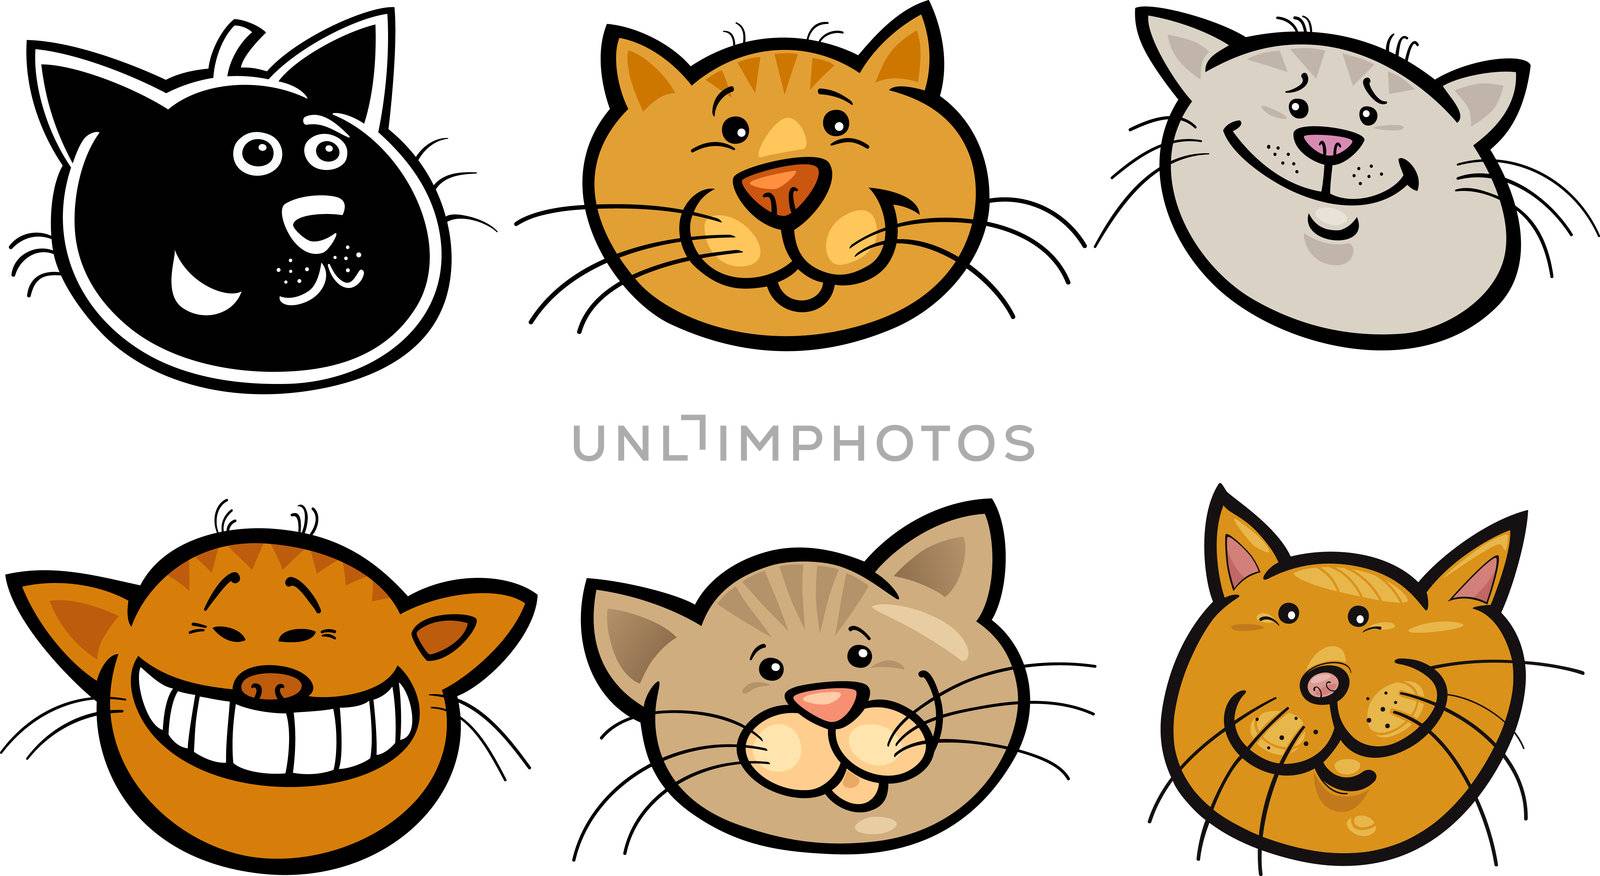 Cartoon Illustration of Different Happy Cats ot Kittens Heads Collection Set